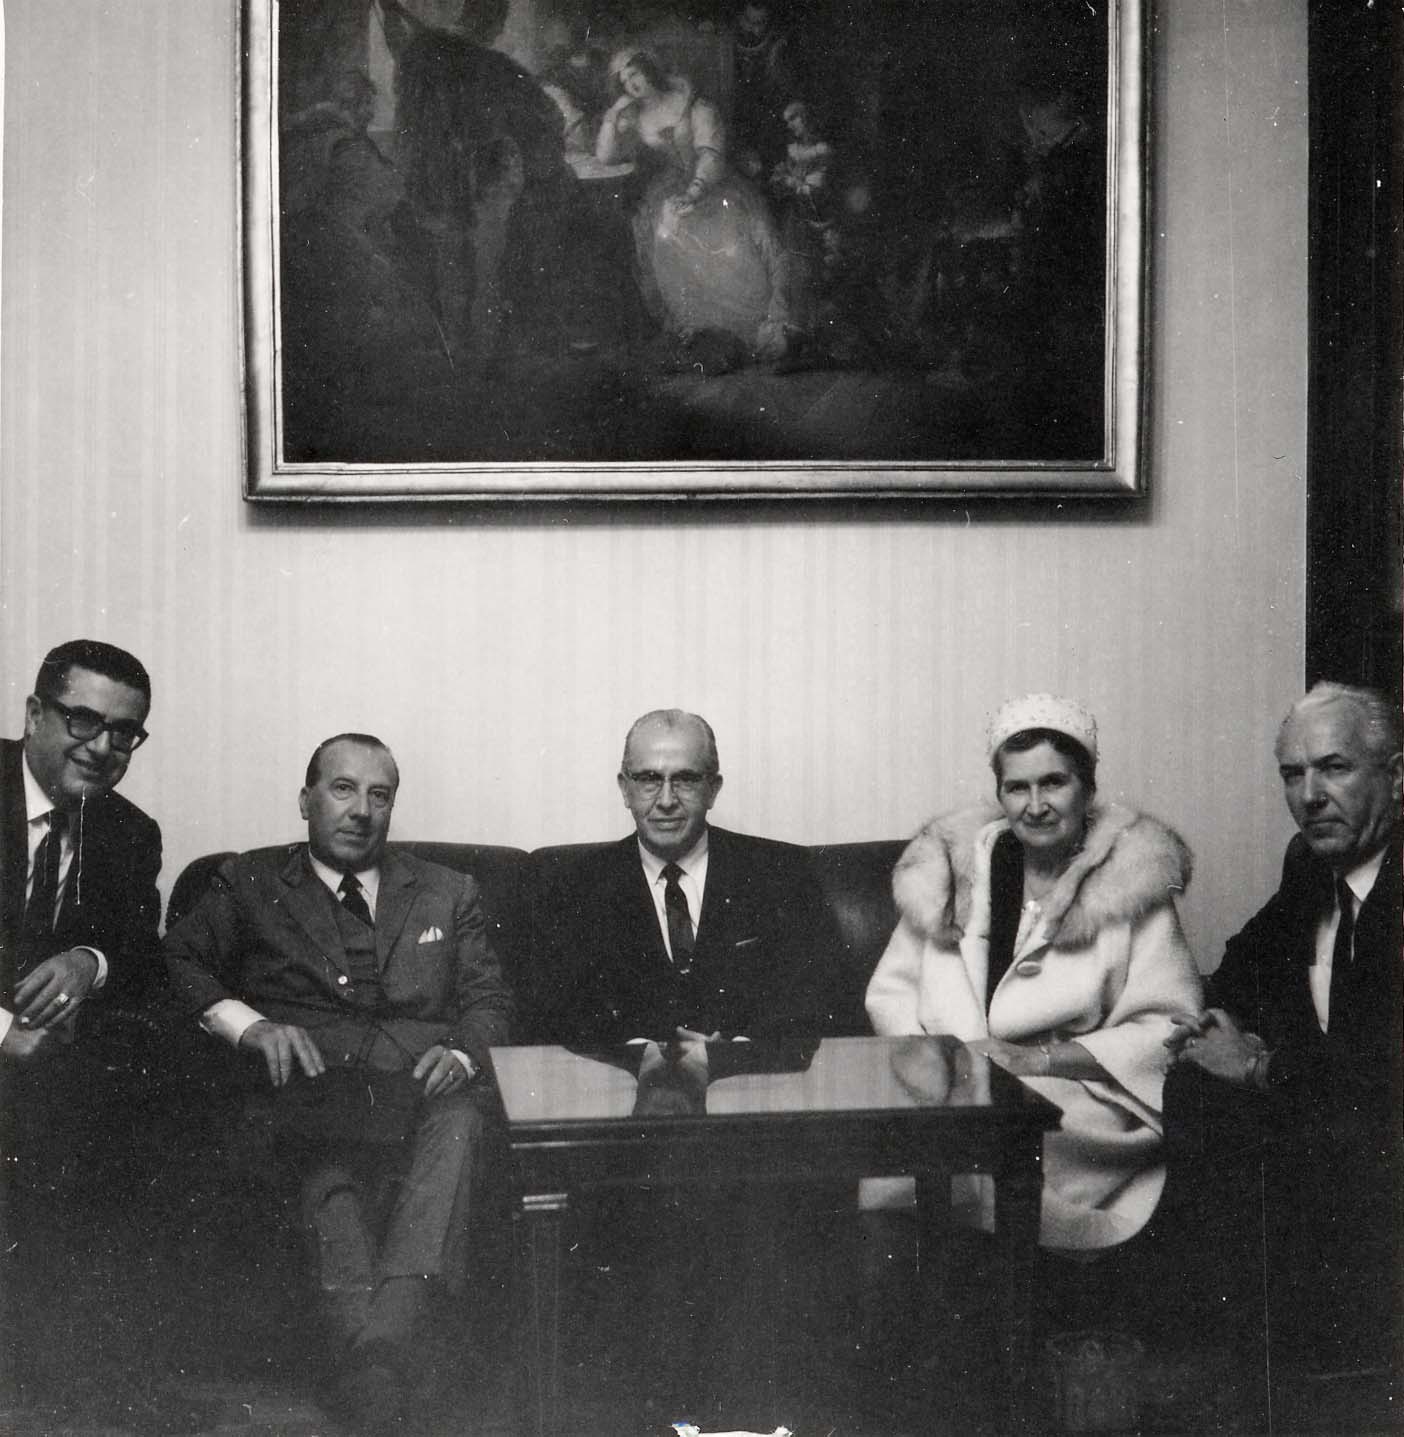 Benson with others